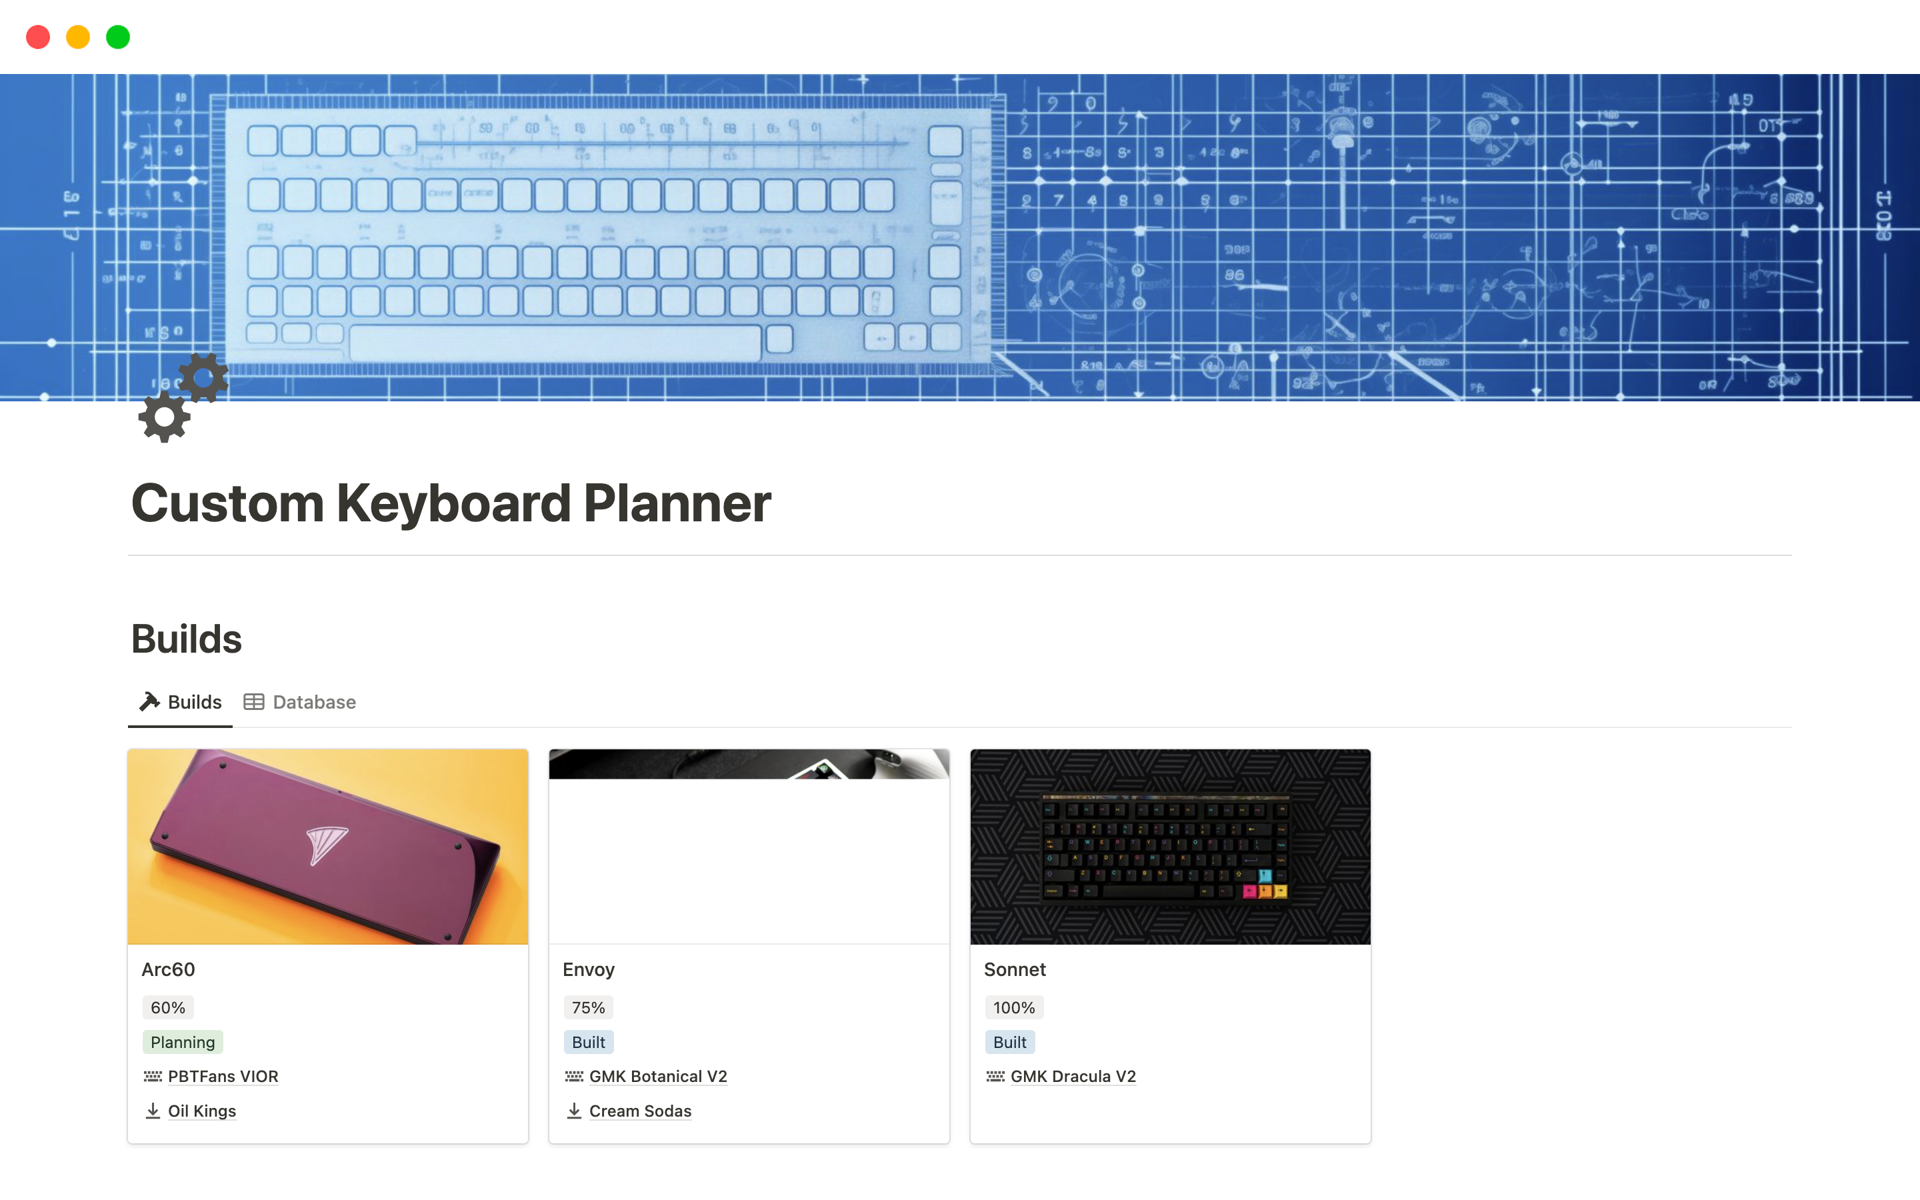 Helps you plan your next custom keyboard build by keeping track of all the parts you need.